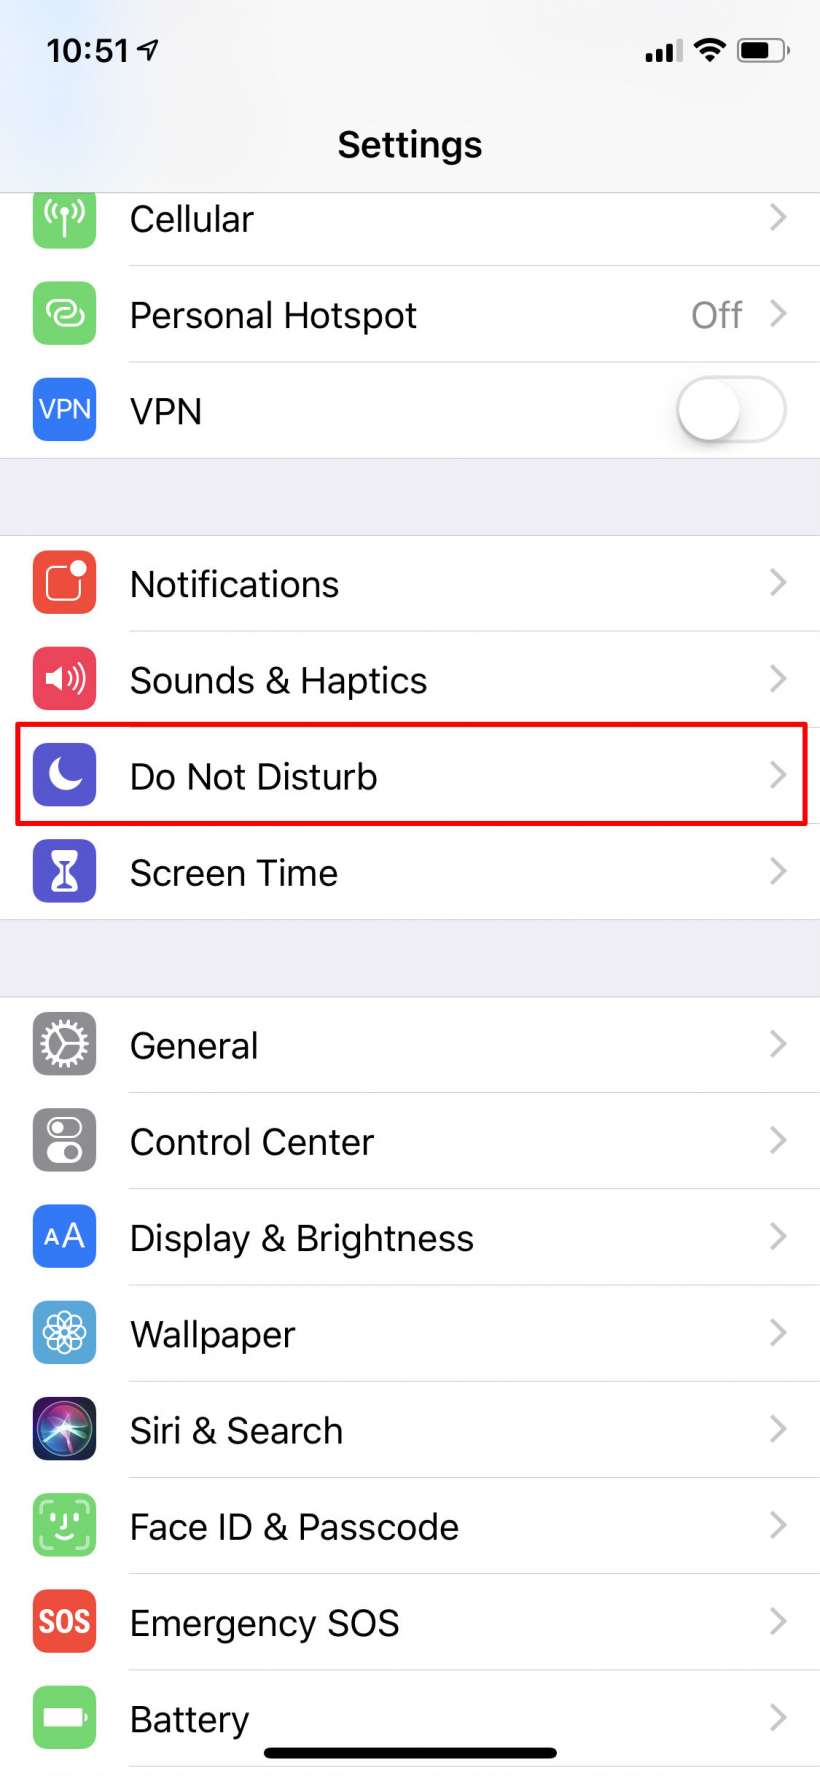 How to use Do Not Disturb Bedtime mode on iPhone and iPad in iOS 12.